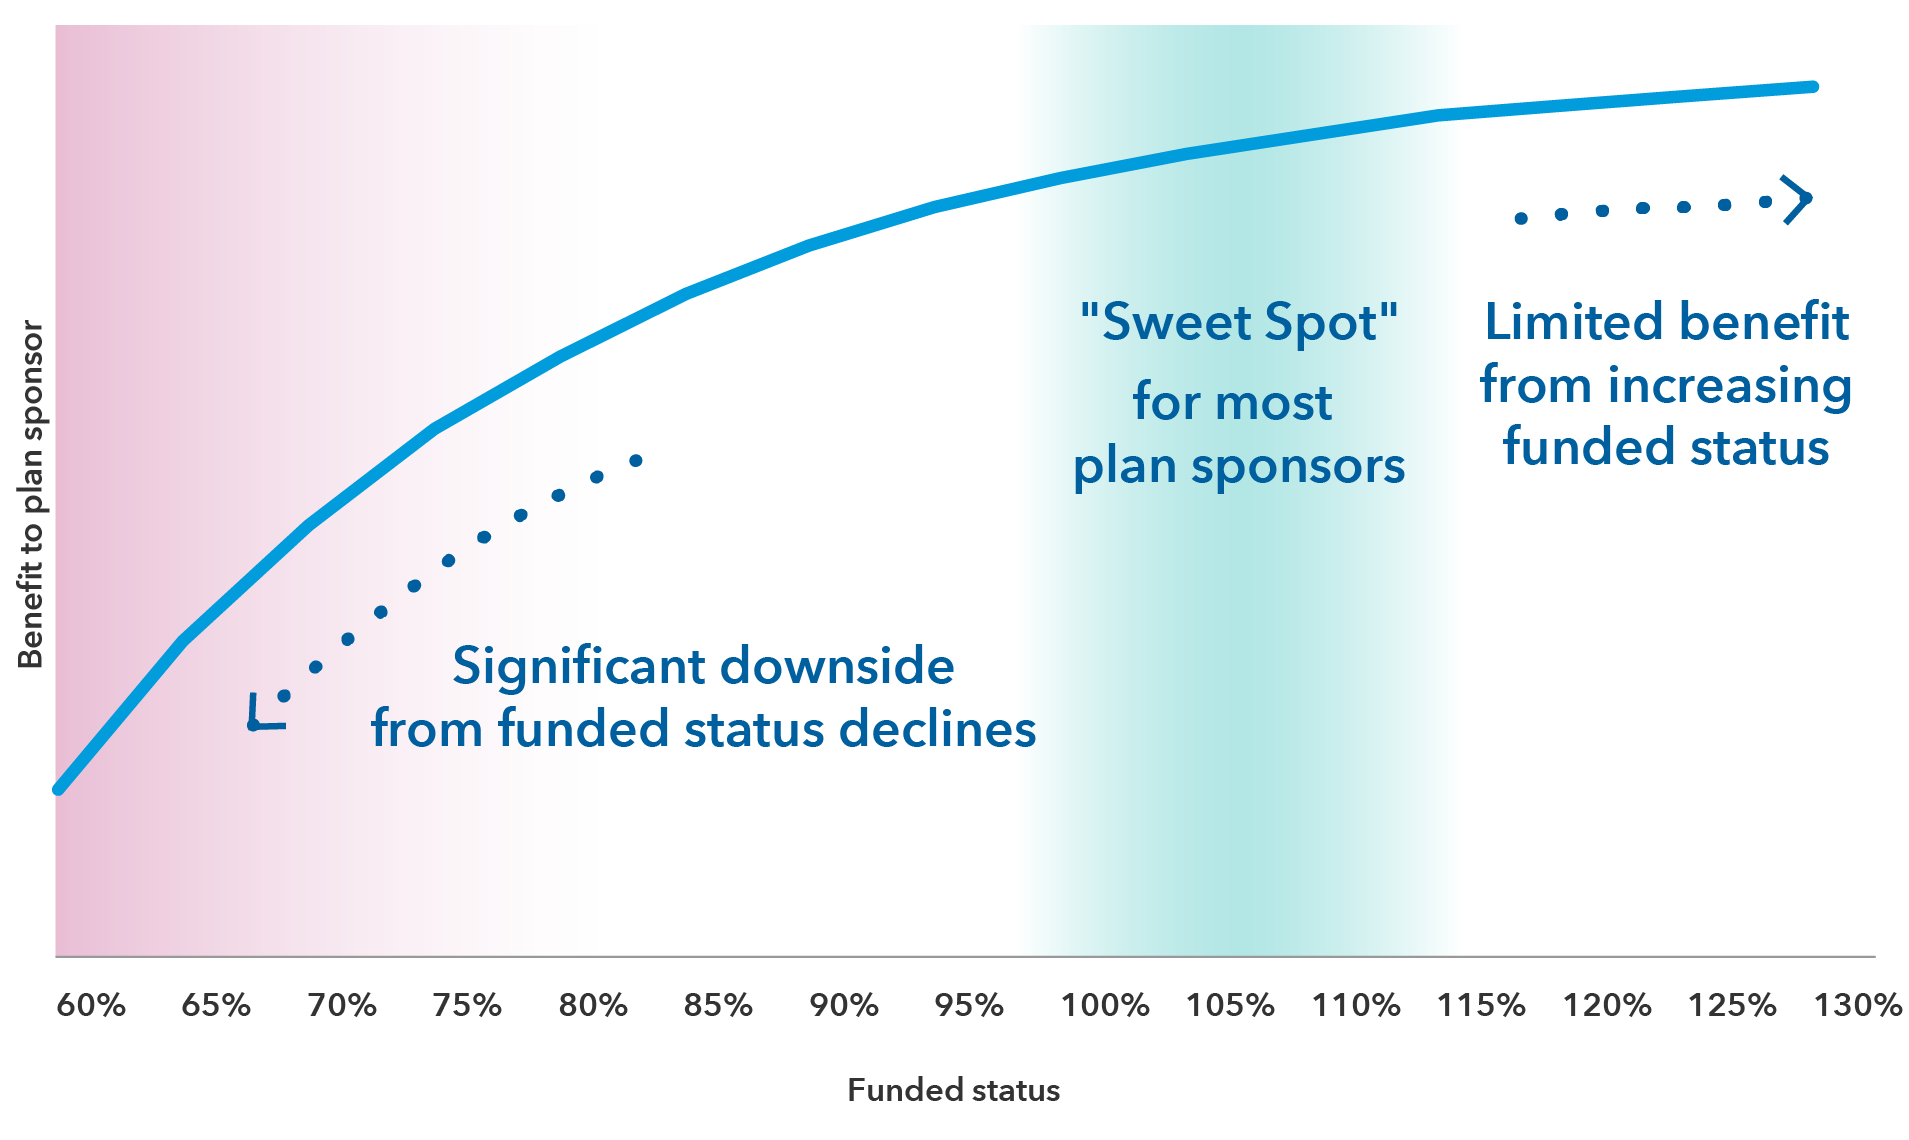 The graphic is a hypothetical illustration showing the level of benefit to the plan sponsor dependent on the funded status of the pension plan. The X-axis shows funded status, ranging from 60% to 130%. The Y-axis shows the benefit to the plan sponsor. The line is curved, with the steepest slope occurring between 60% and 95% funded status, where the chart indicates there is “significant downside from funded status declines.” The slope flattens between 100% and 115%. The slope flattens further for funded status levels between 115% and 130%. The curve demonstrates our view that a funded status of around 100% to 115% provides a “sweet spot” for plan sponsors and that above this funded status, additional benefits may be limited. Meanwhile, the loss of benefits, or negative consequences, could become more significant when the funded status falls below 100%. 